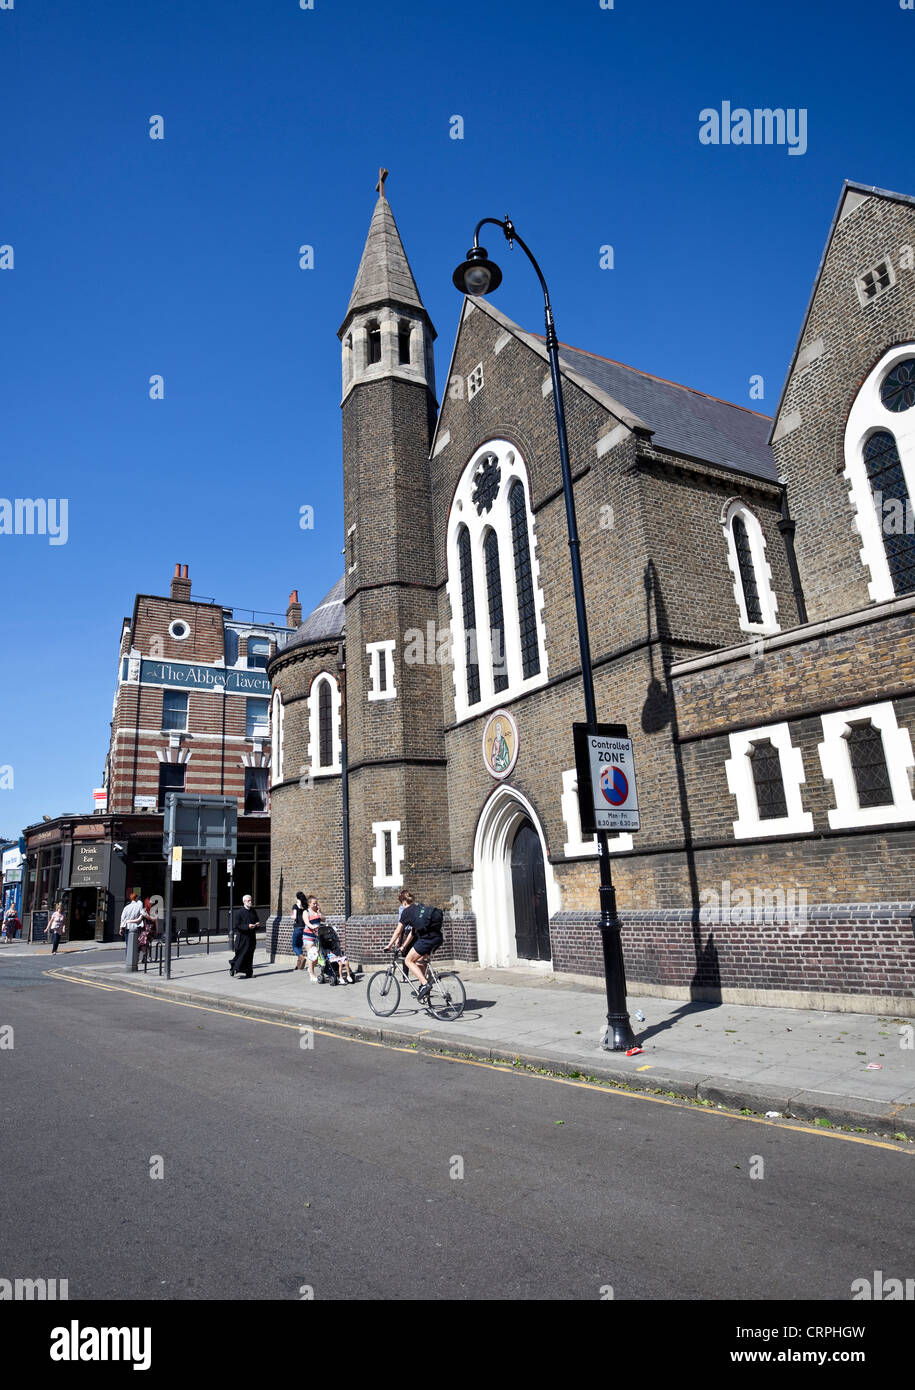 St Andrew griechisch-orthodoxe Kathedrale, Kentish Town, London, UK Stockfoto